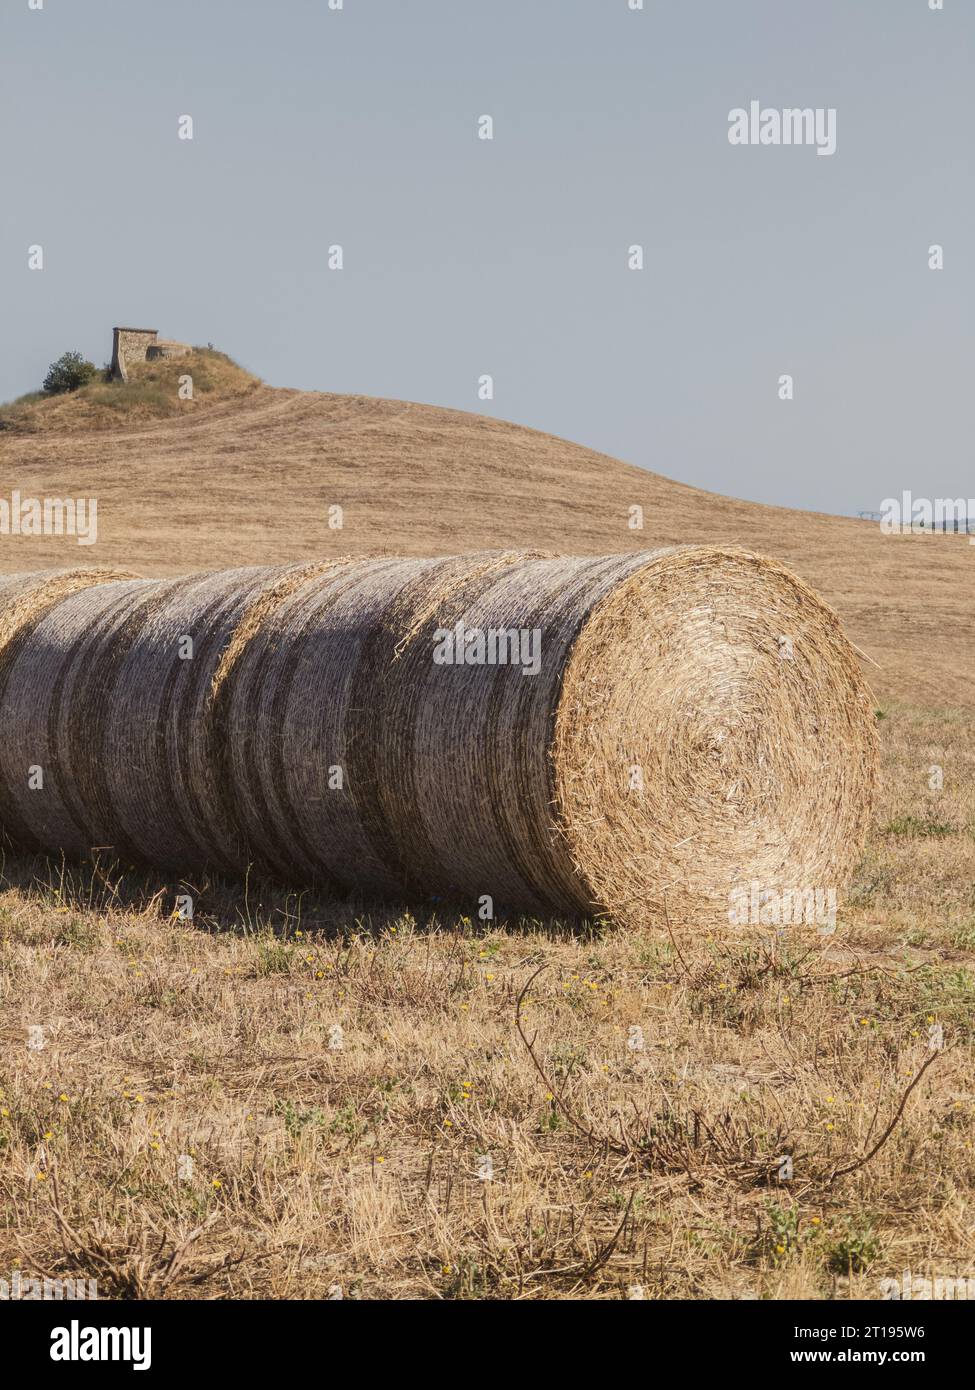 Rural countryside landscape of Tuscany hills. The Tuscany region is characterized by the cultivation of wheat, olives, vineyards and cypress passages. Stock Photo